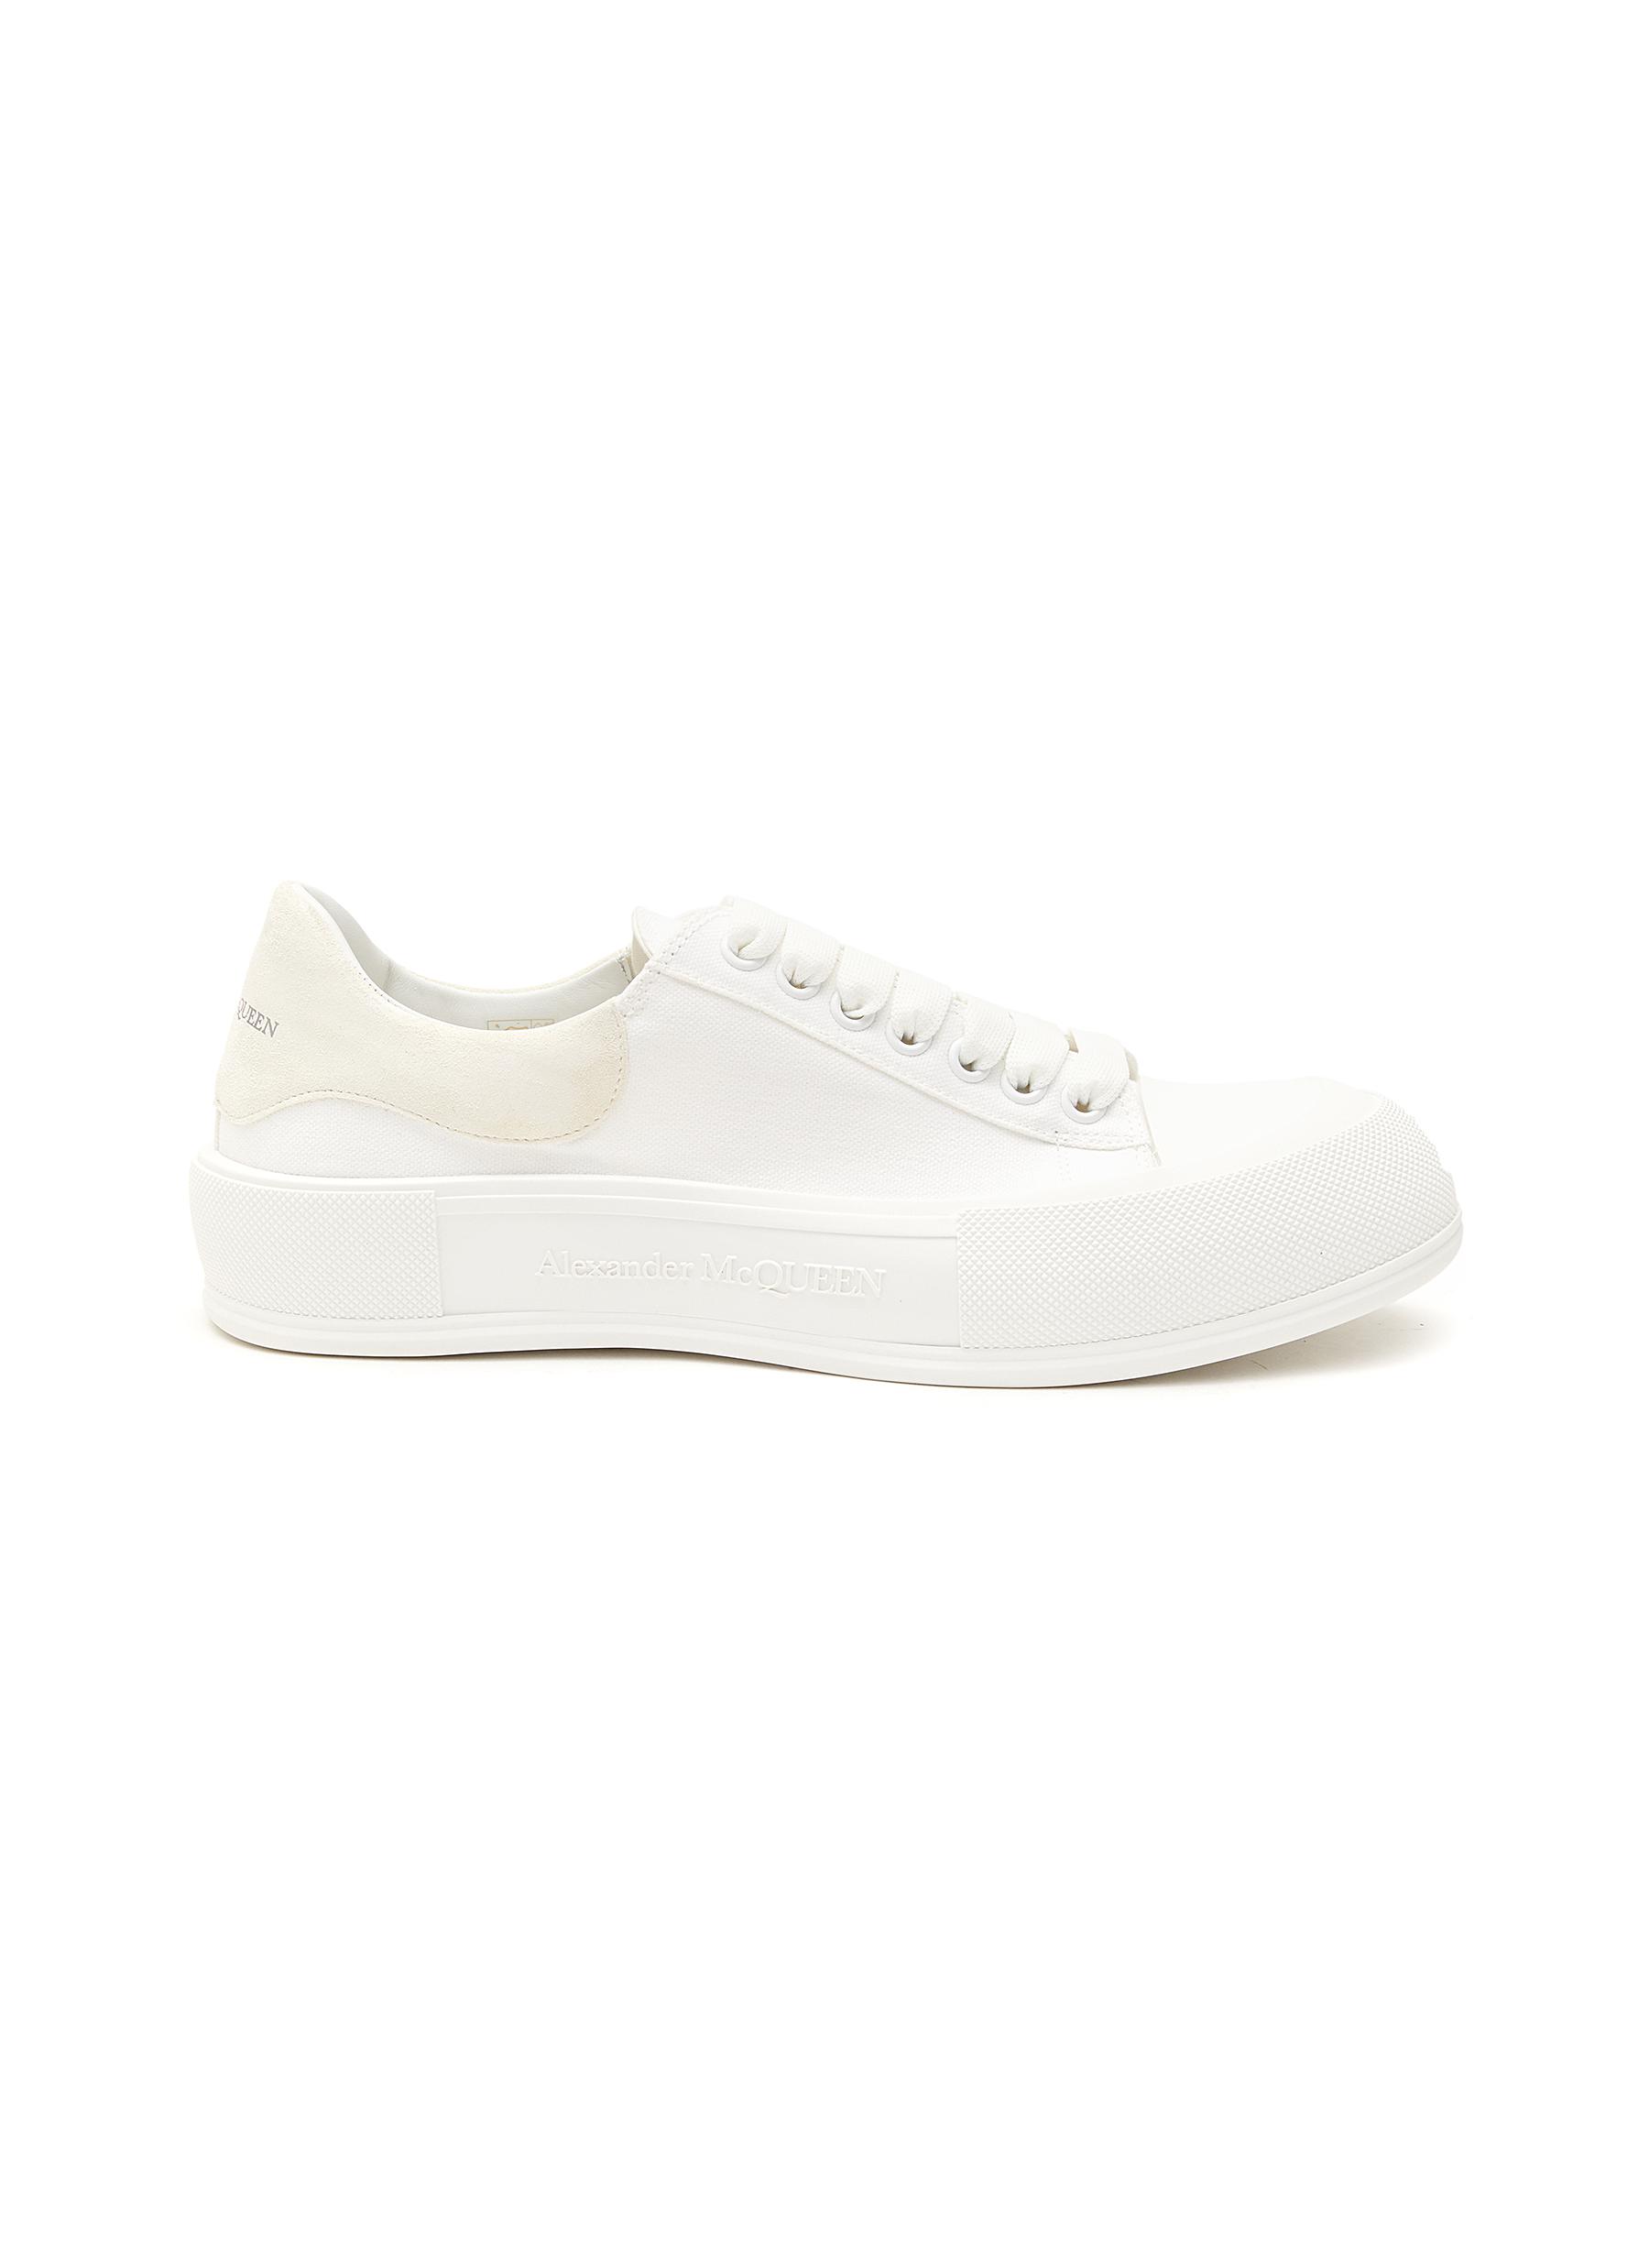 ‘Deck Plimsoll' Canvas Lace-Up Sneakers